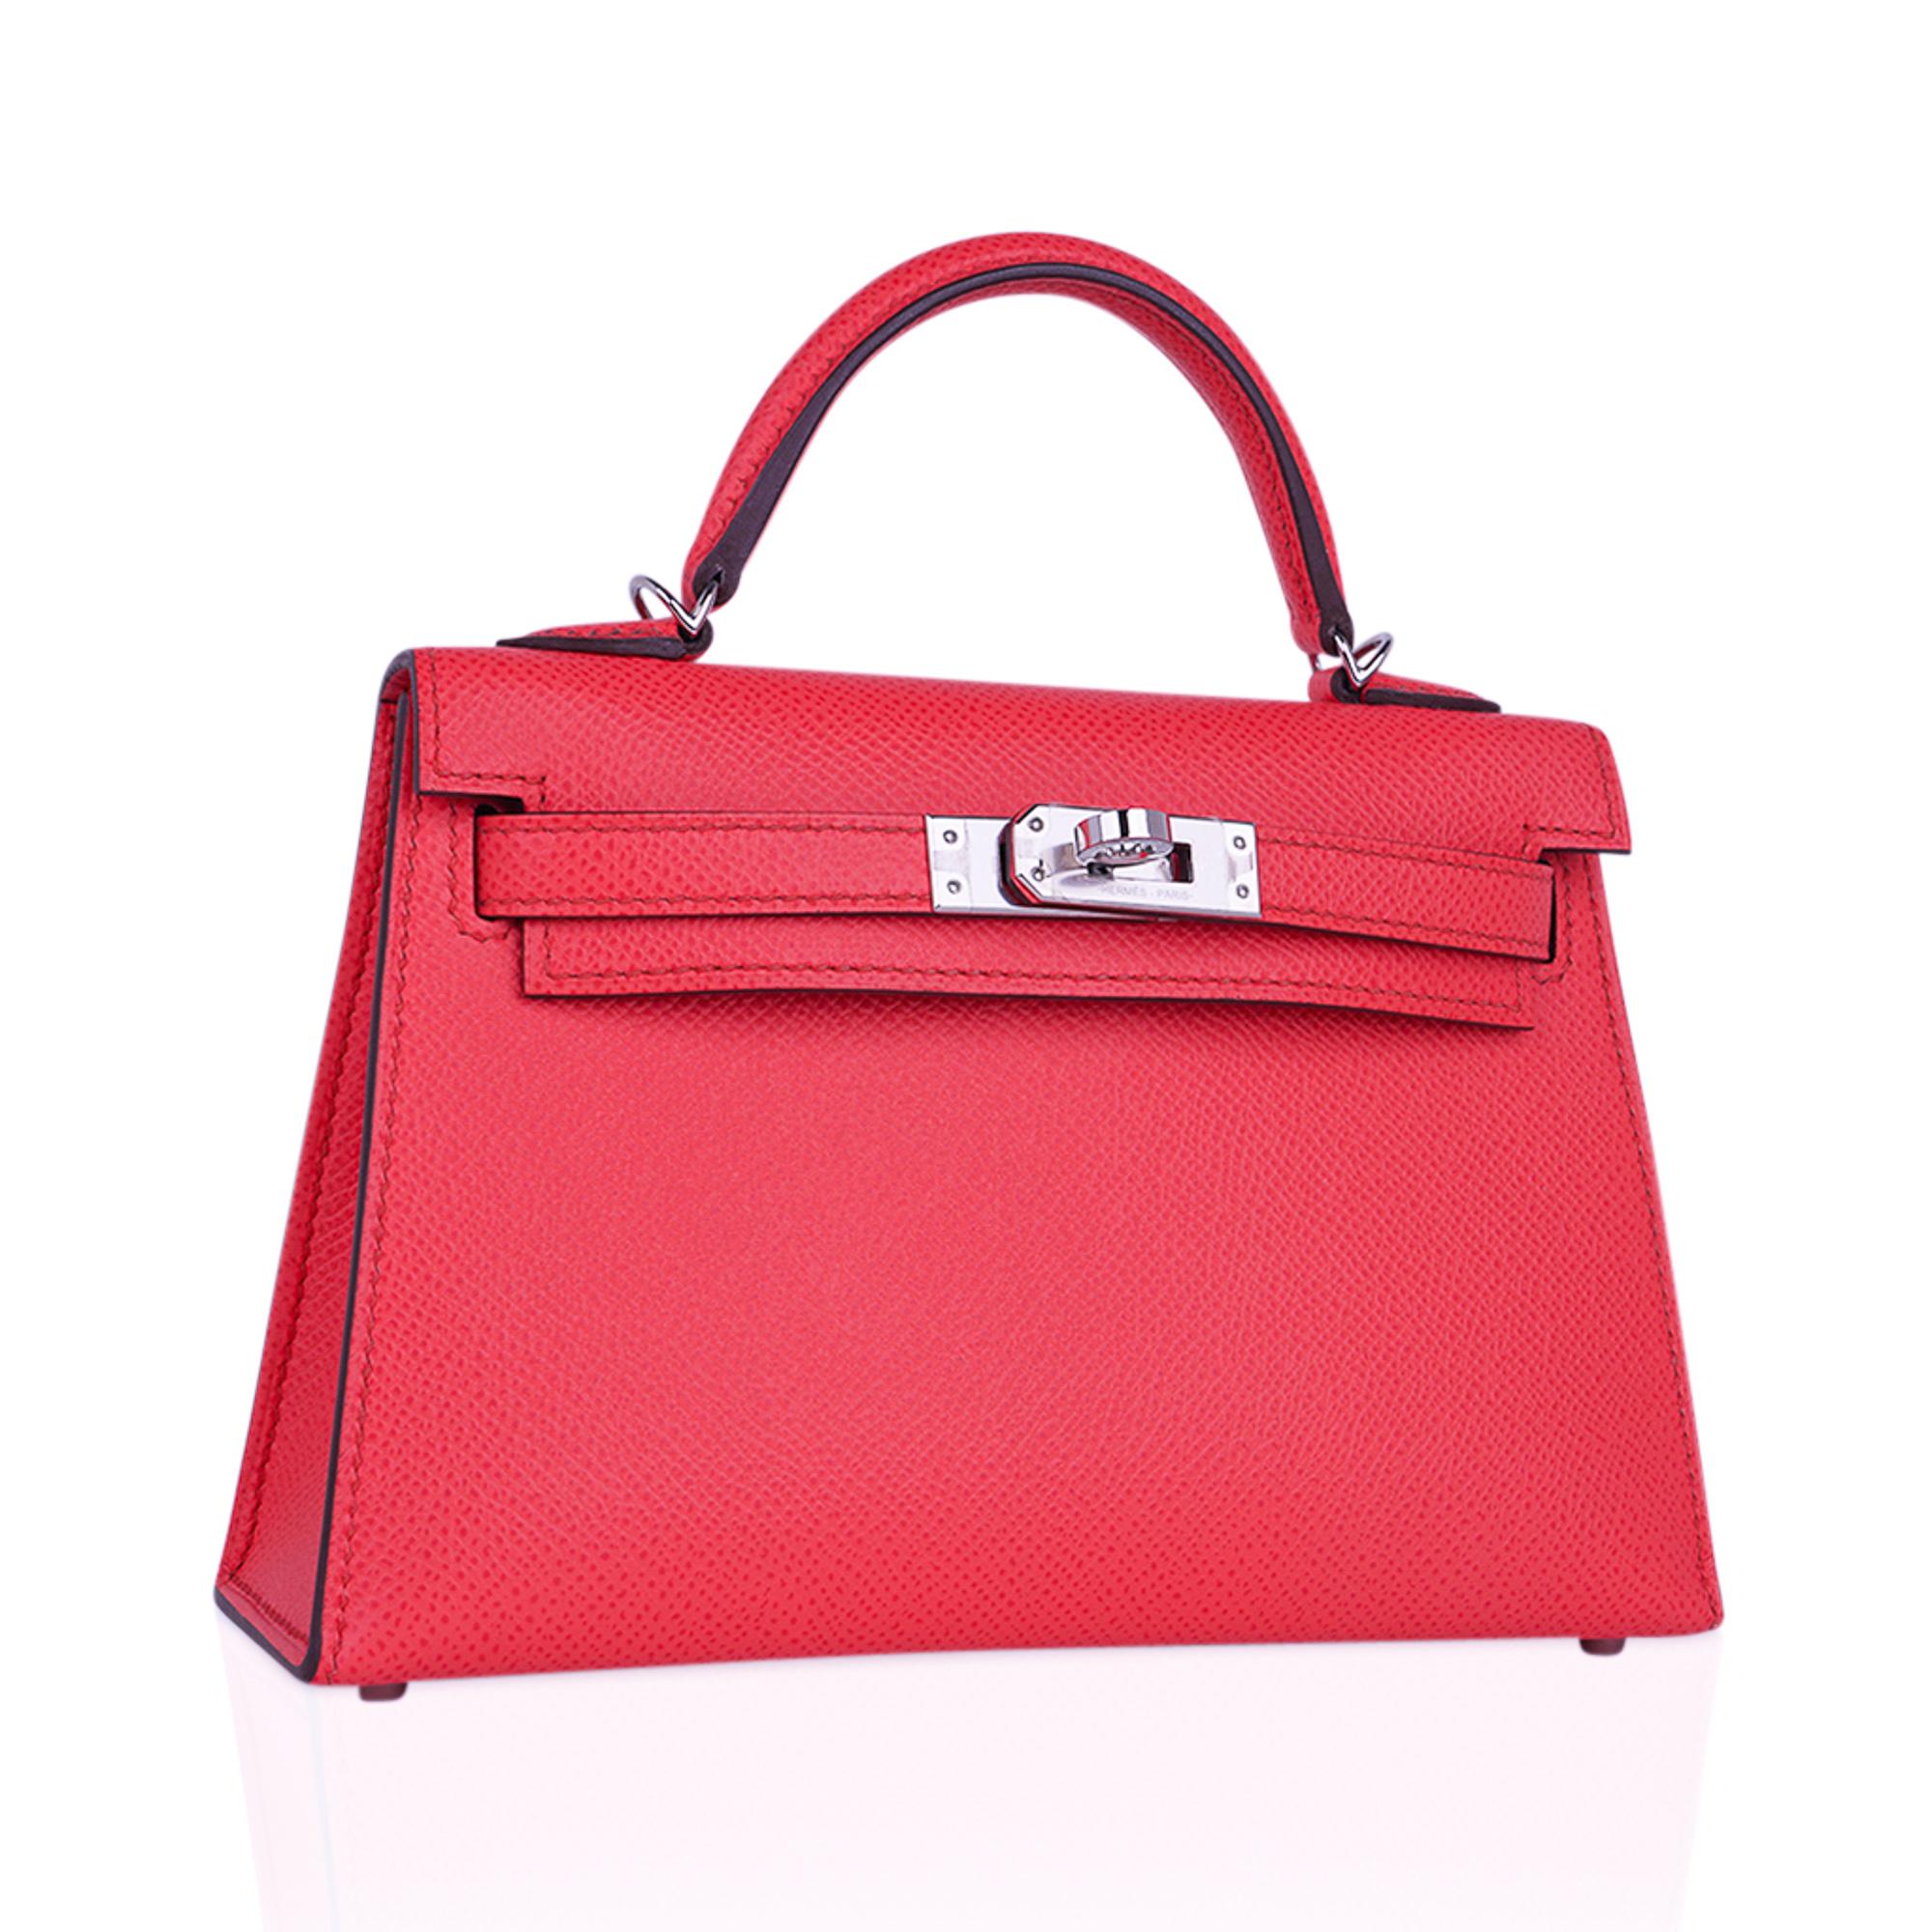 Mightychic offers an Hermes Kelly 20 Mini Sellier bag featured in Rose Texas.  
Hermes Rose Texas is a fabulous pop of colour in pink with a orange/coral undertone.
Espom leather accentuated with Palladium hardware.
Comes with signature Hermes box,